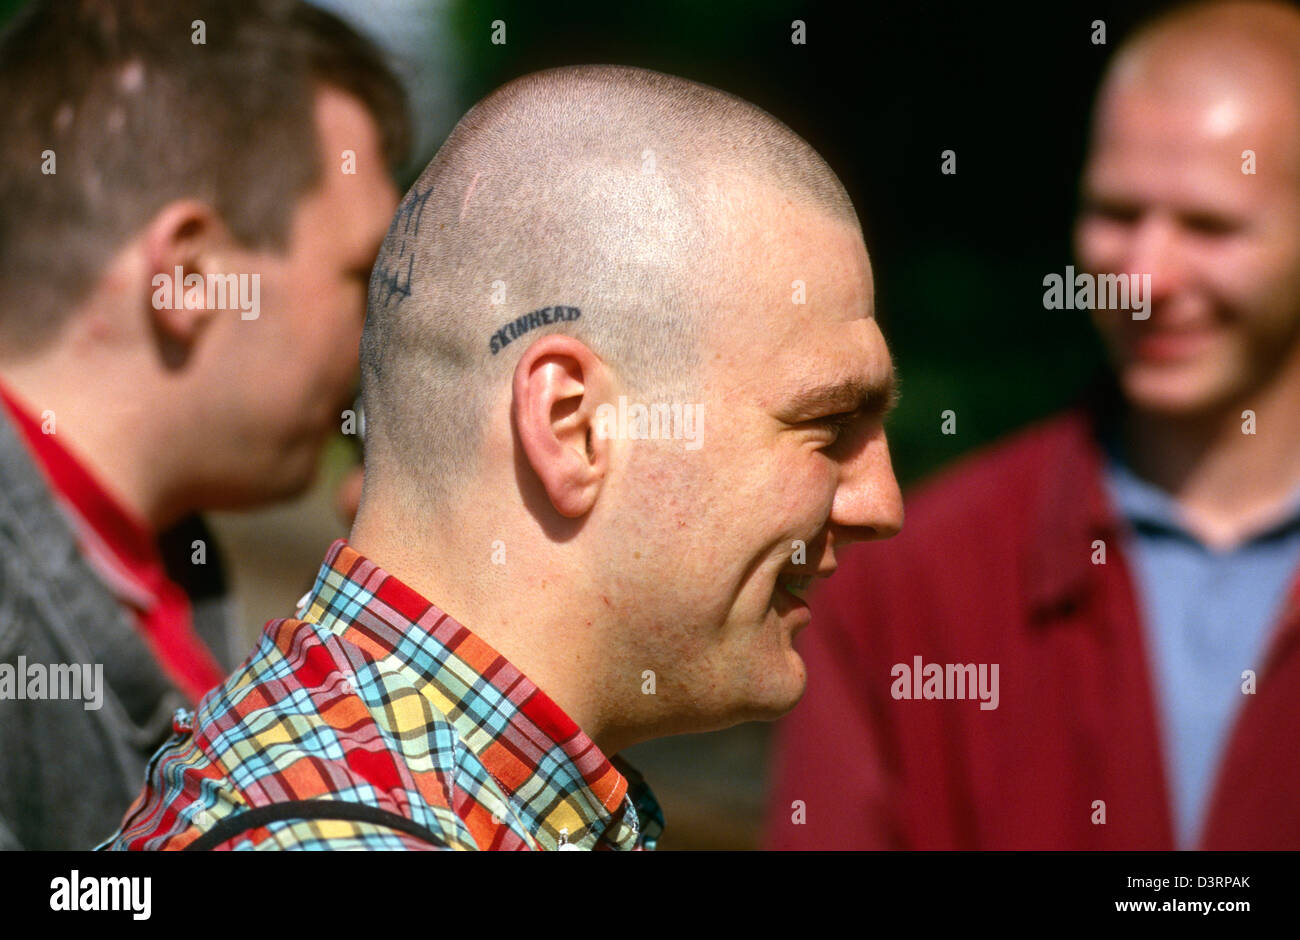 Oi!-The Meeting, a young man with the word SKINHEAD tattooed on his head, Luebeck, Germany Stock Photo